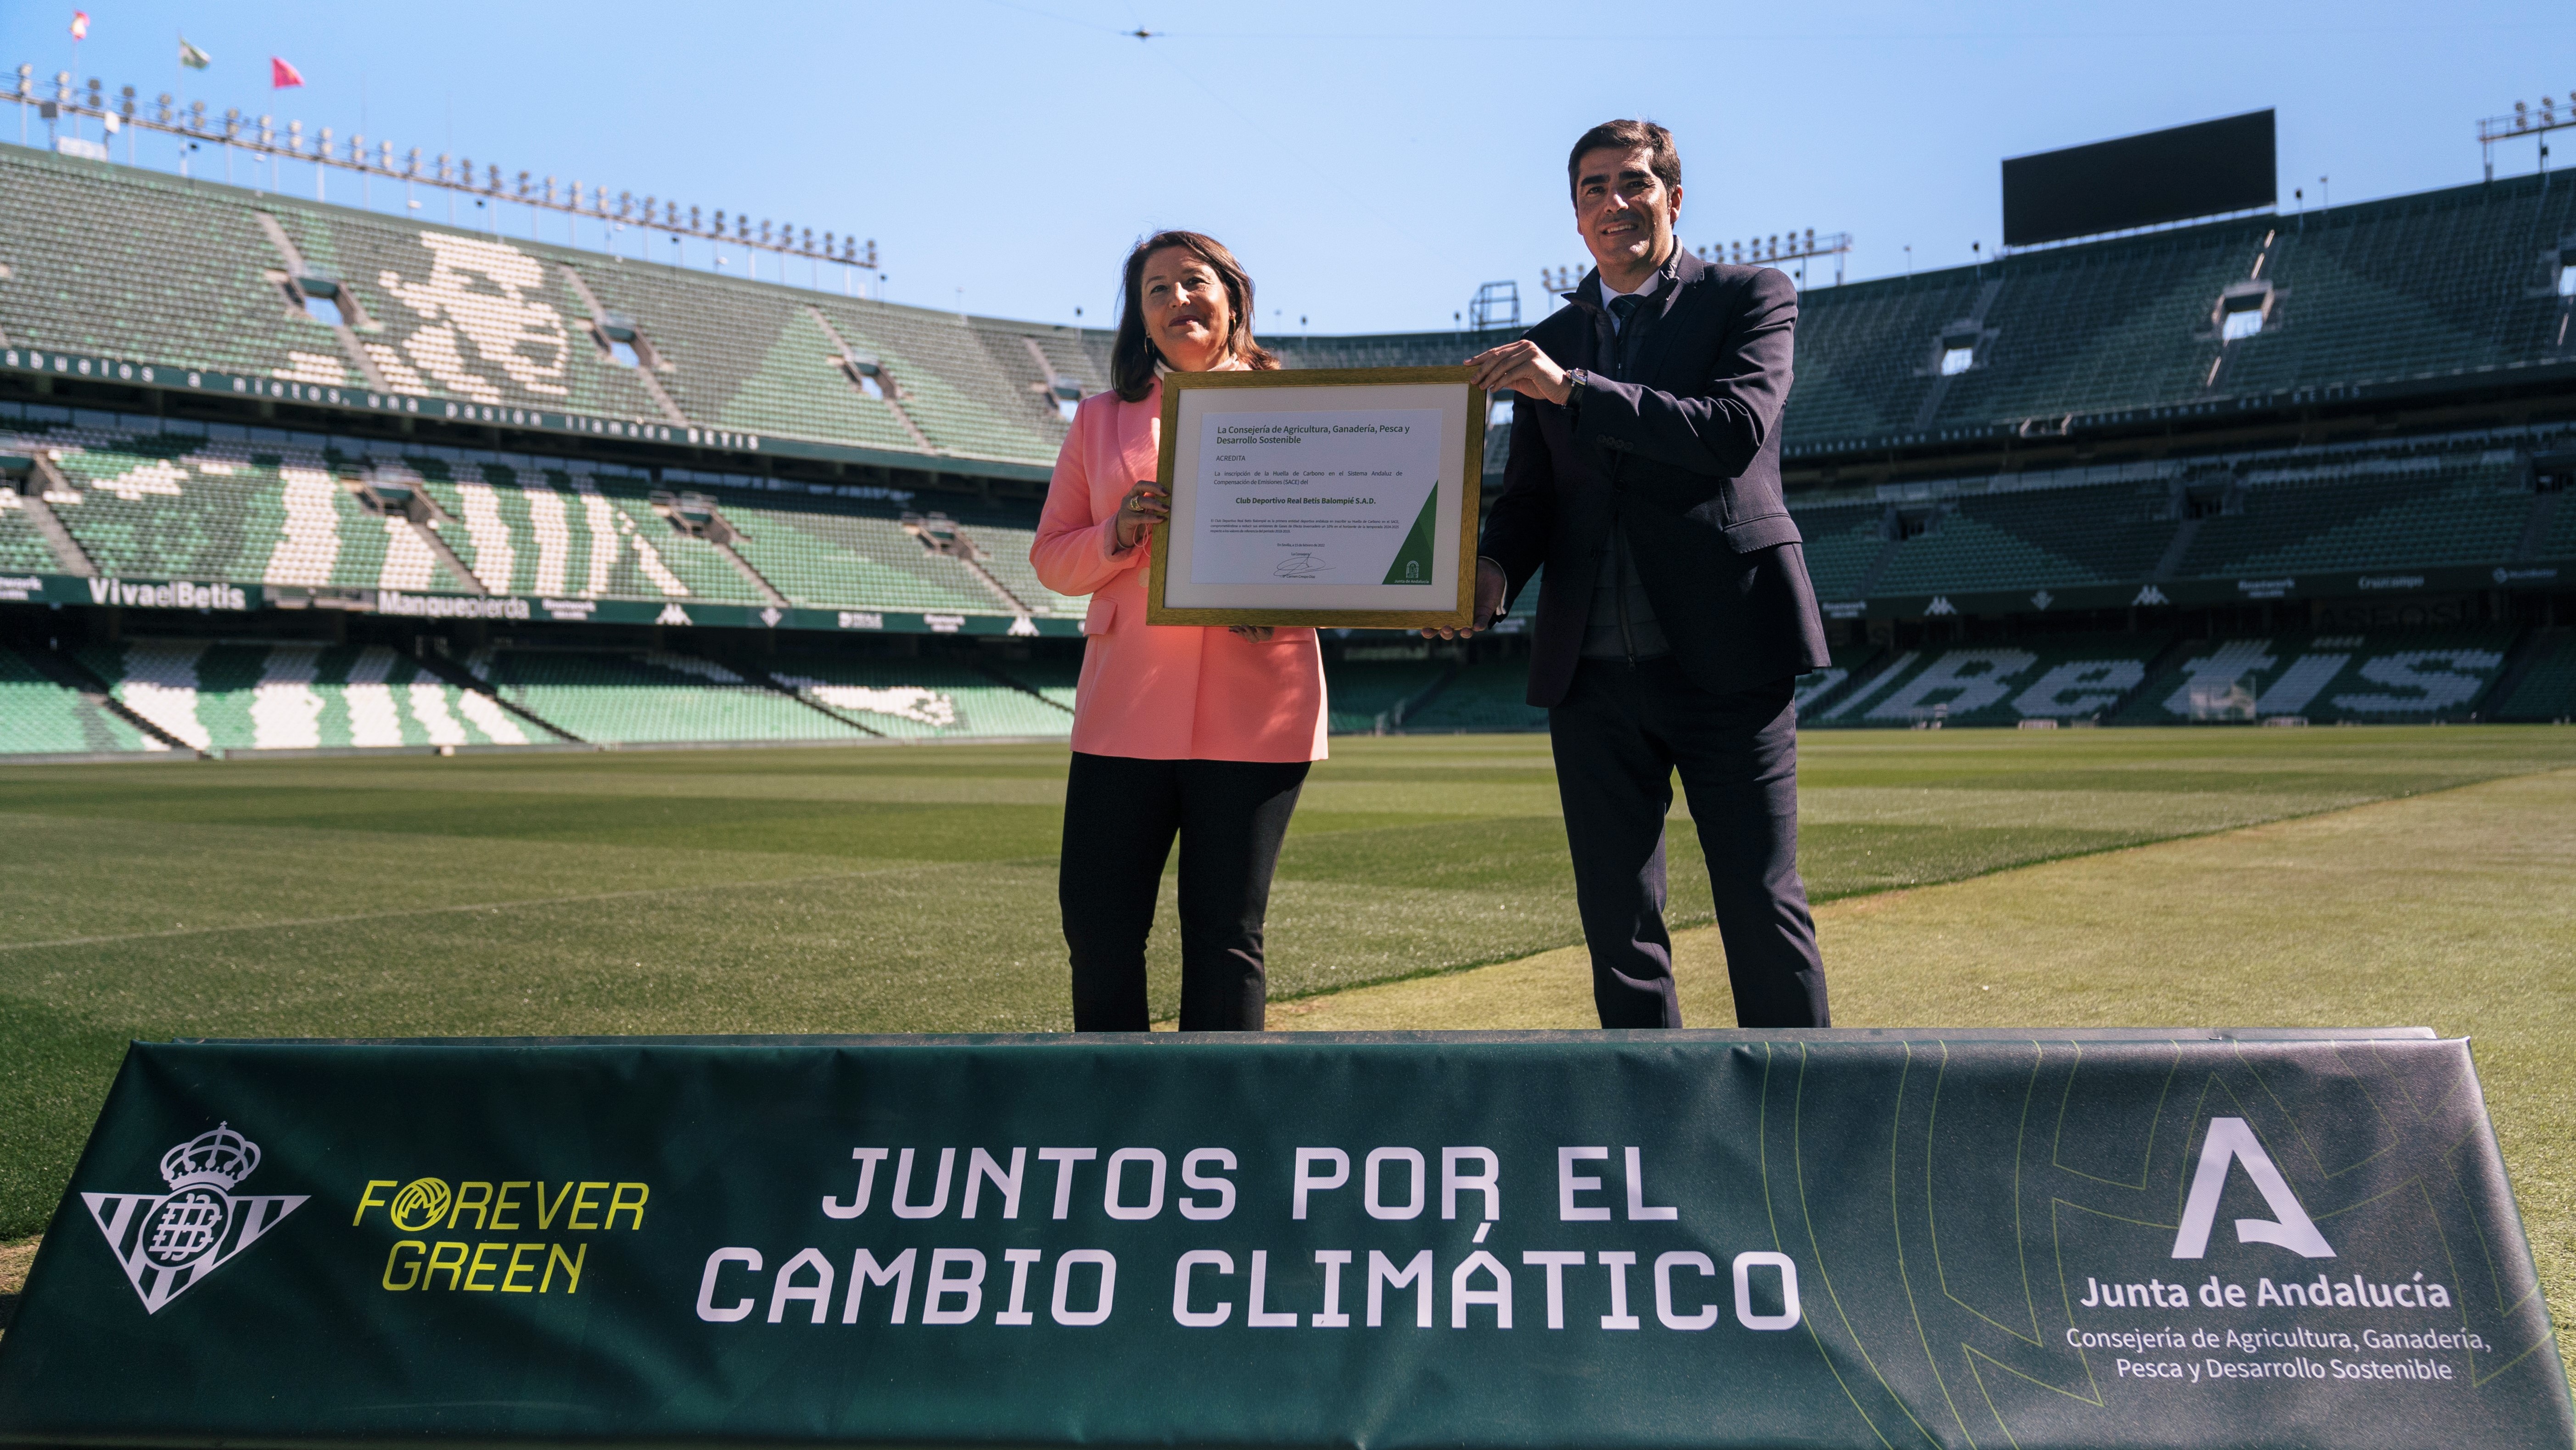 Junta de Andalucía and Real Betis Balompié join forces to fight climate change